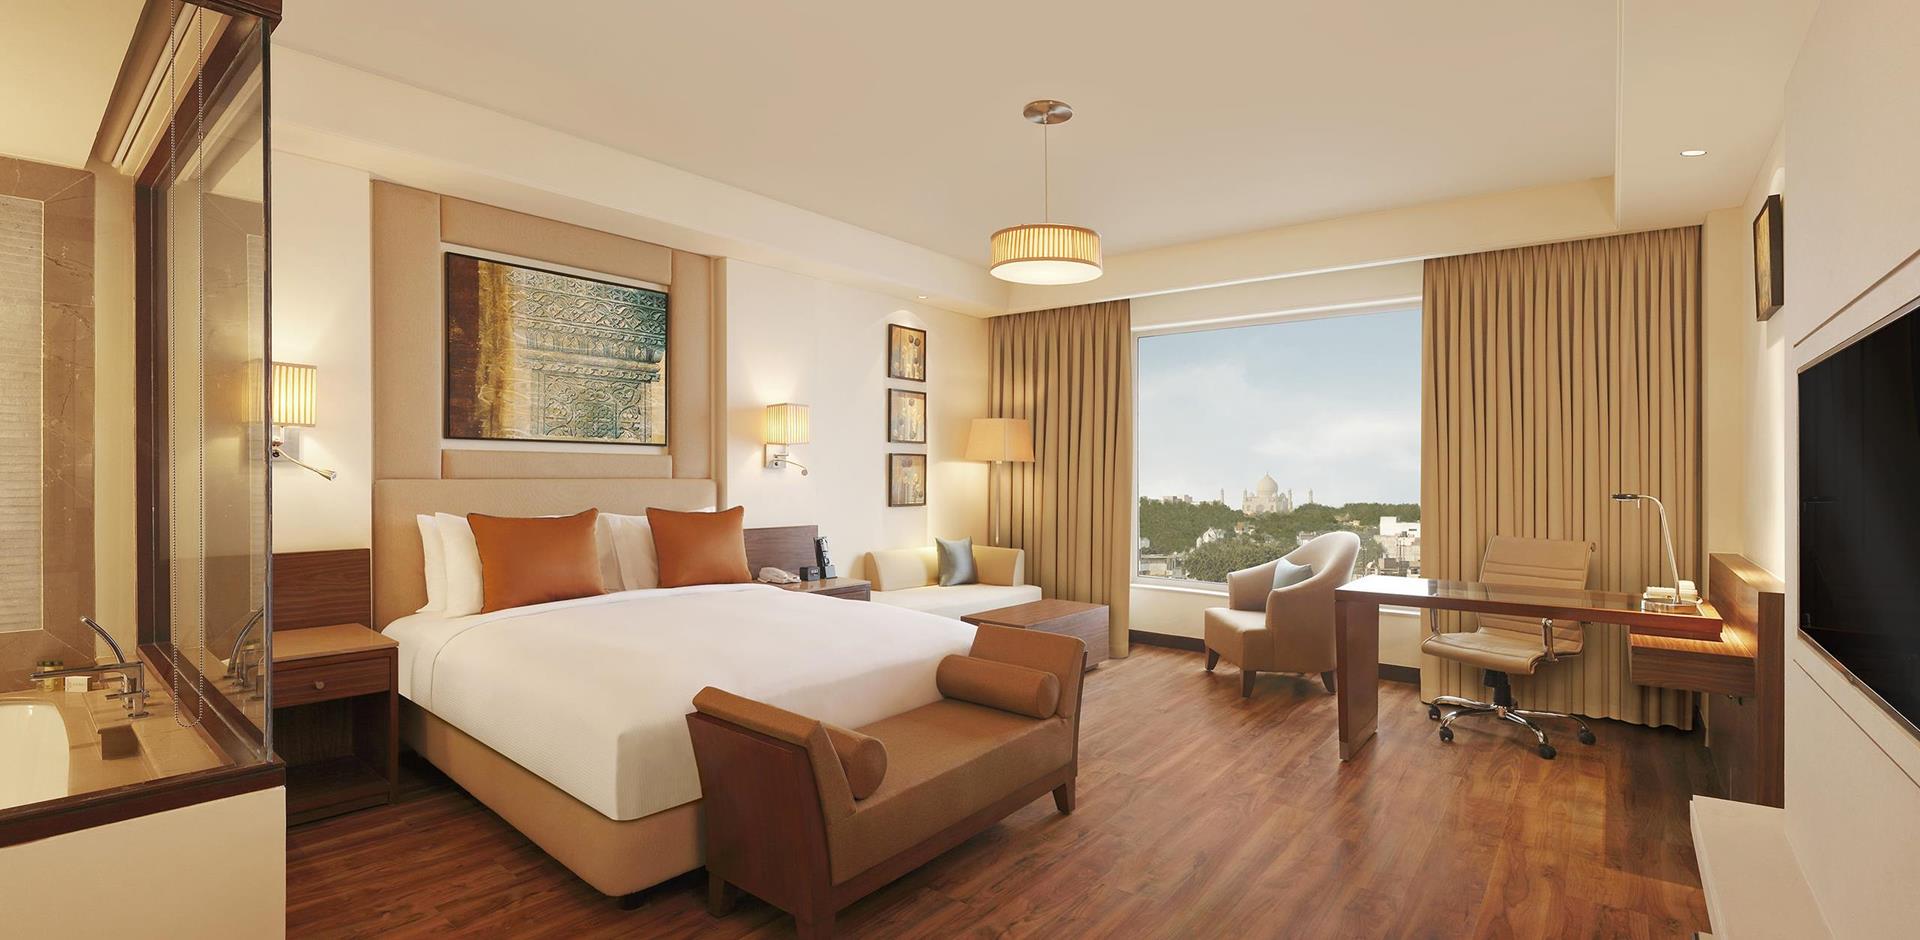 Bedroom, Double Tree by Hilton, Agra, India, A&K